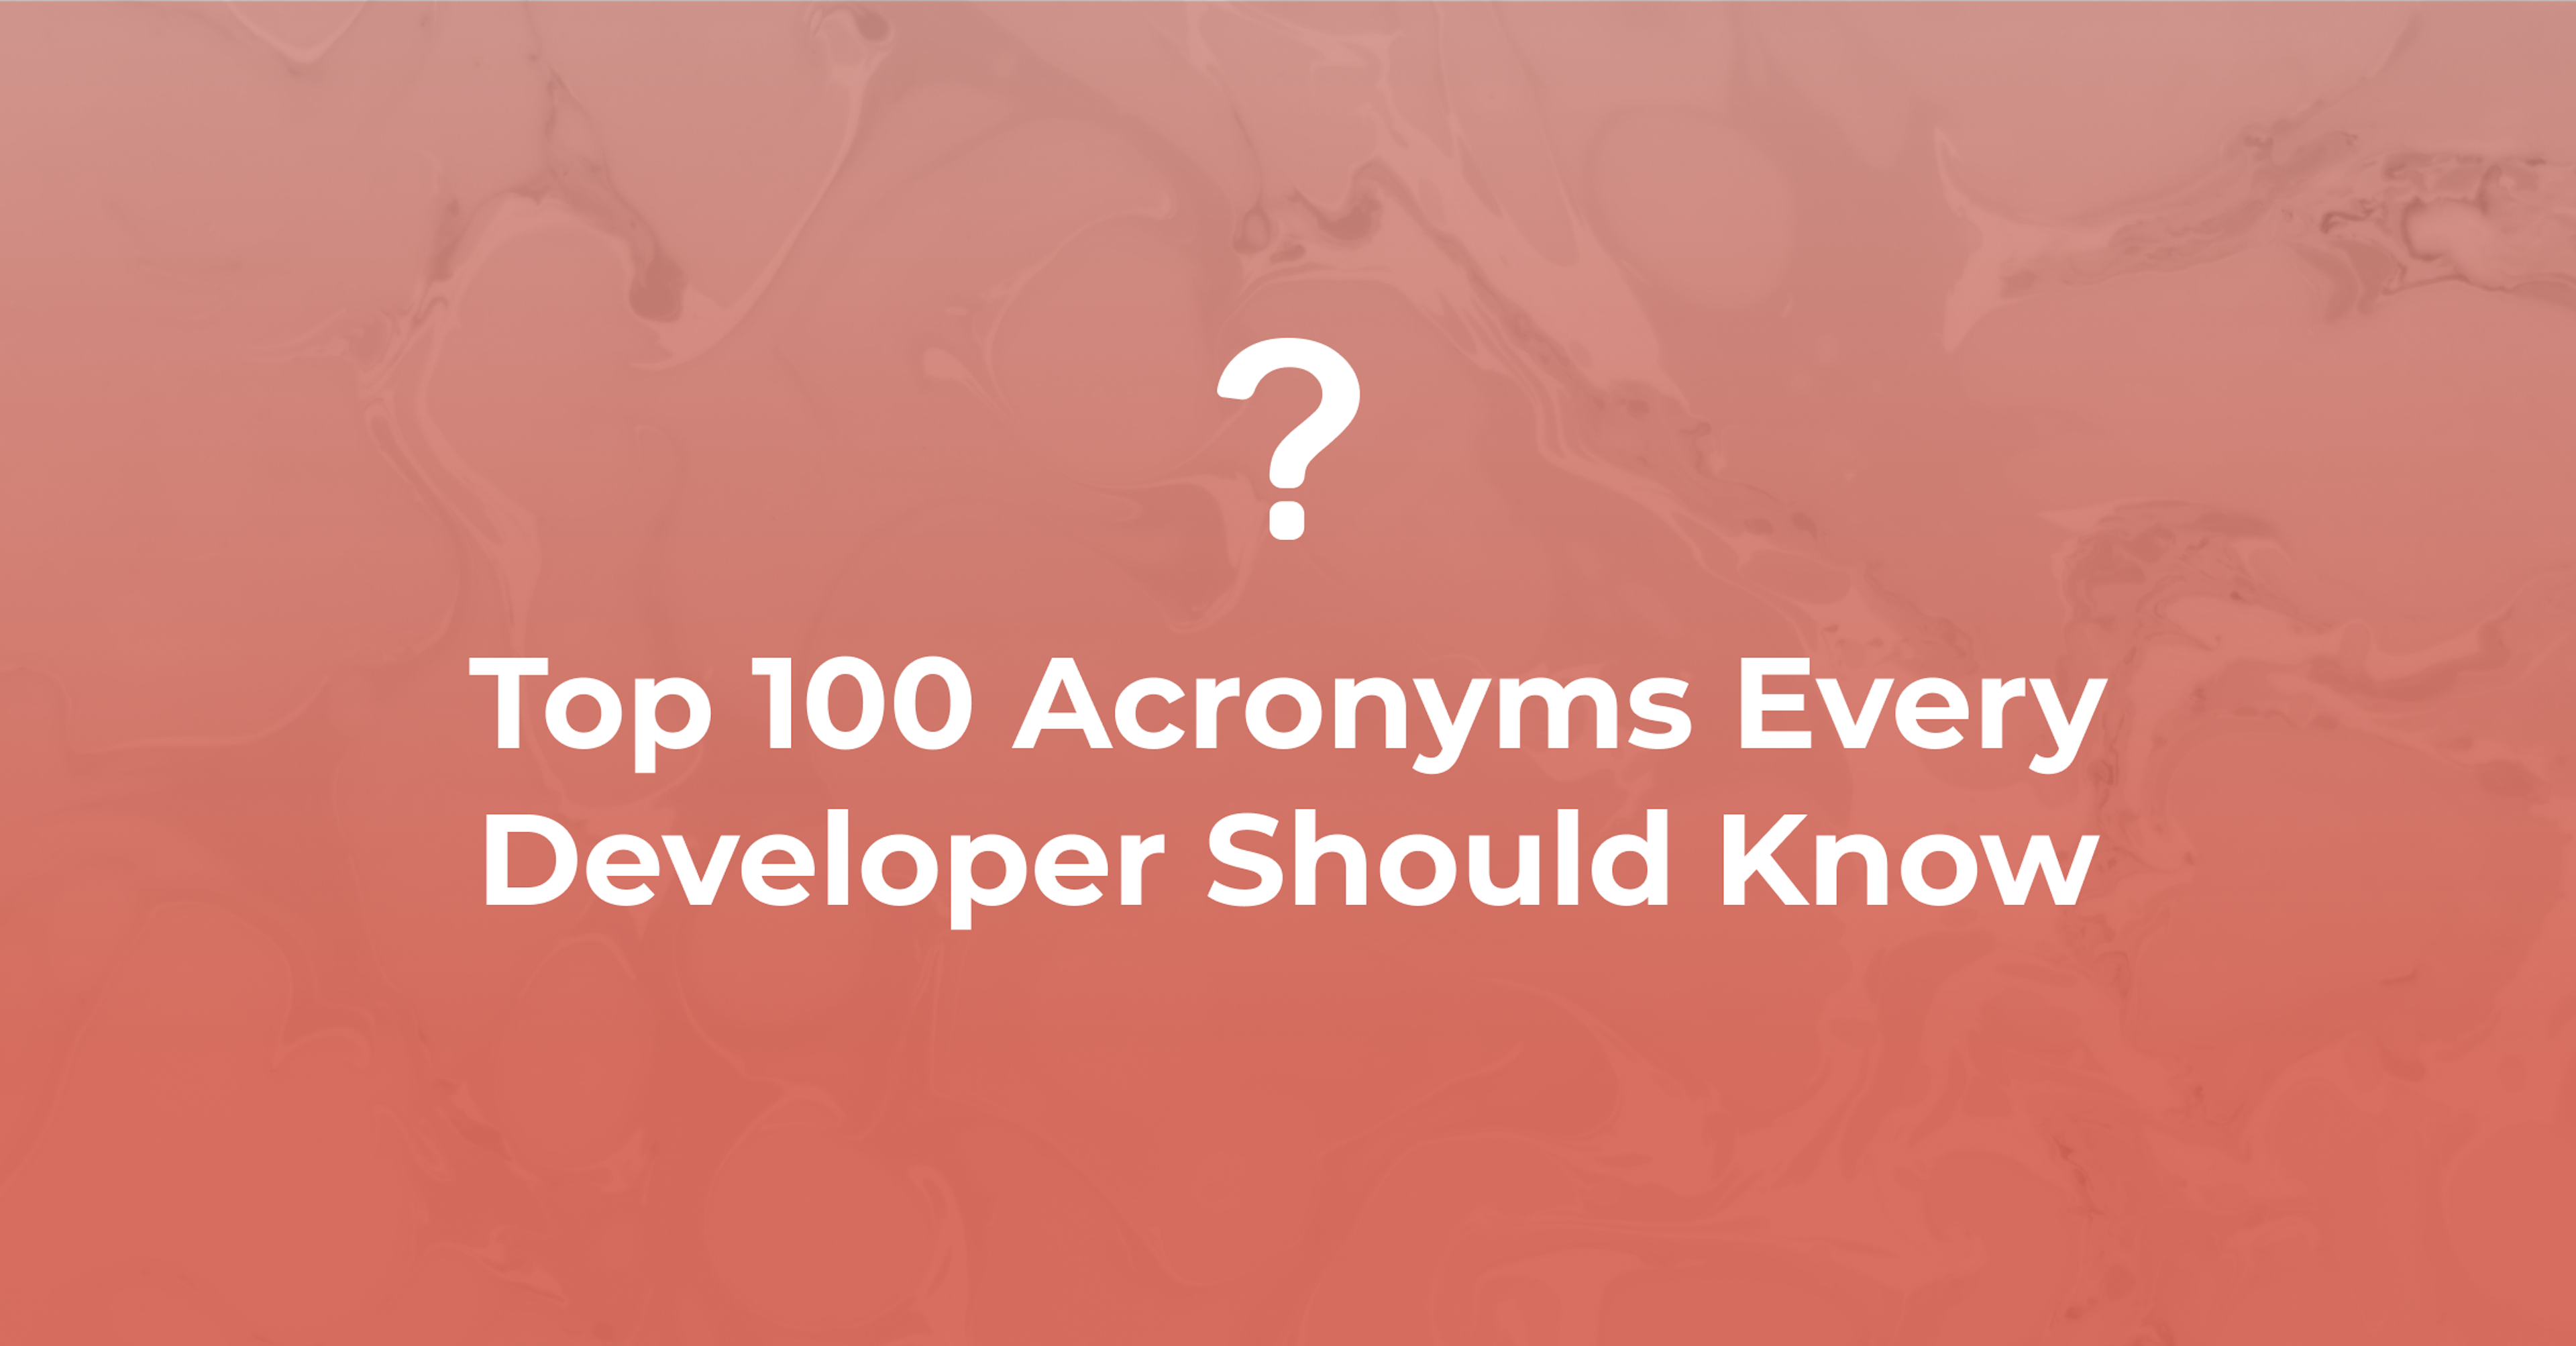 Top 100 Acronyms Every Developer Should Know